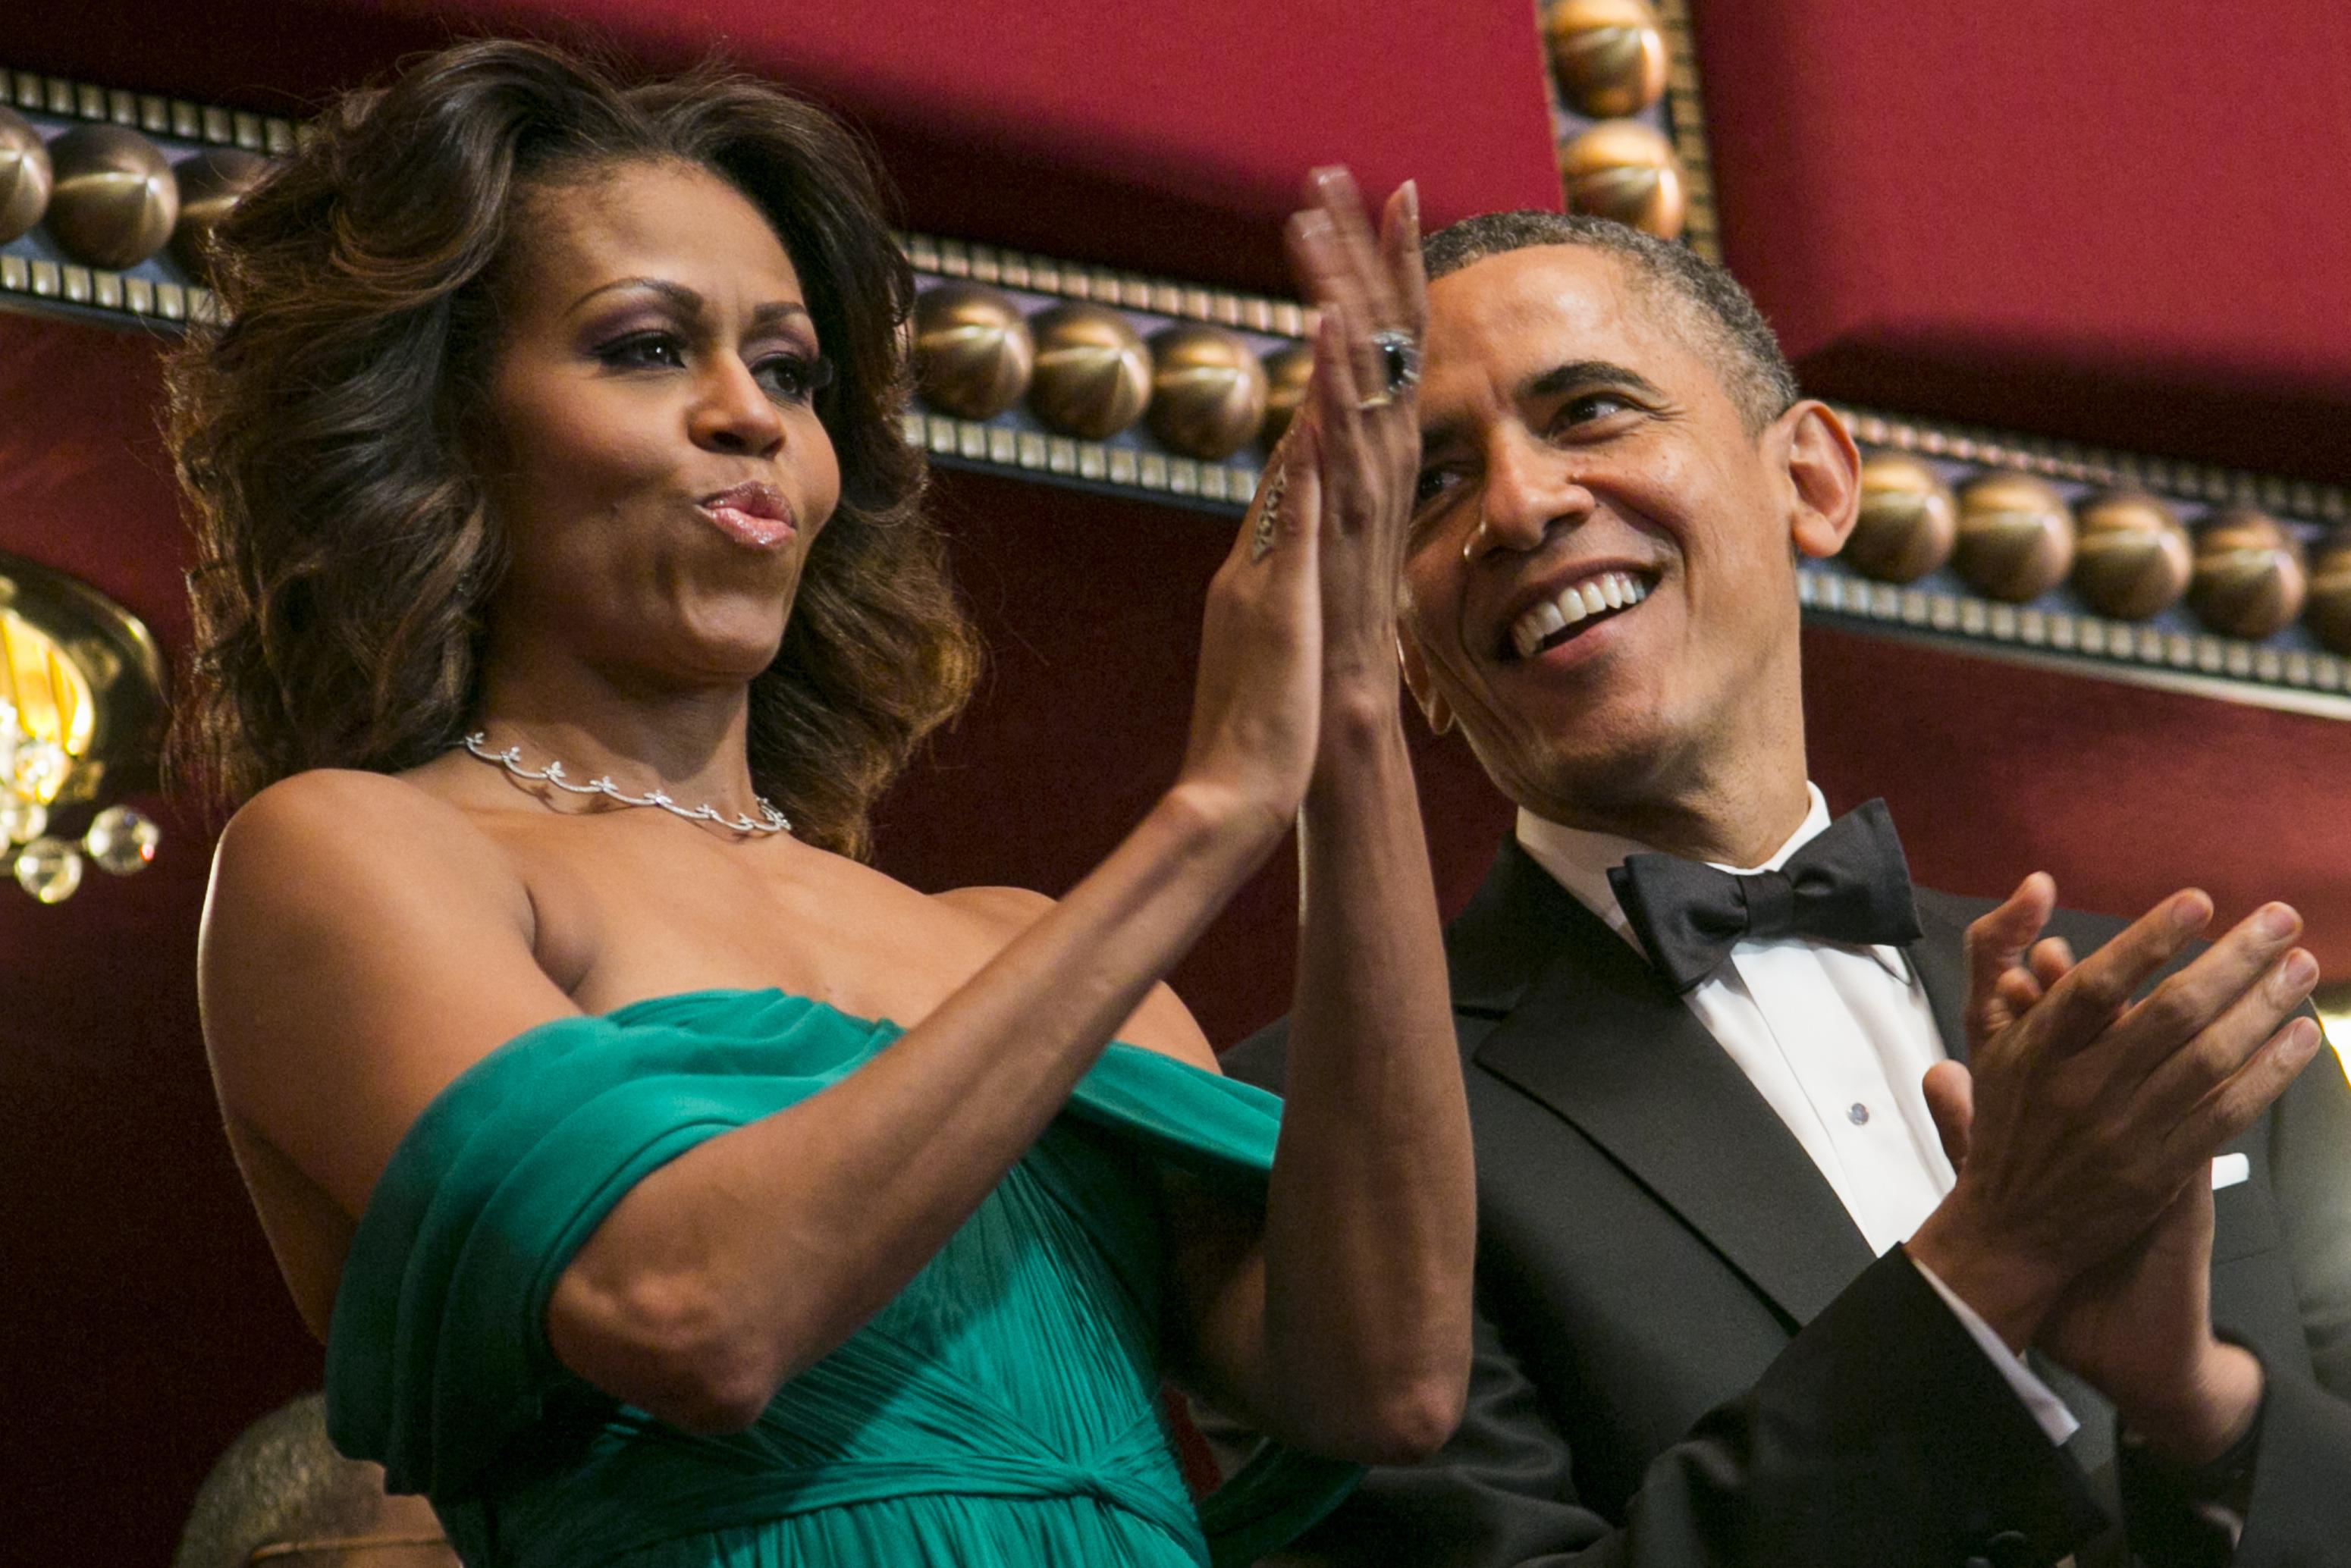 United States President Barack Obama and First Lady Michelle Obama attend the 2013 Kennedy Center Honors on December 8, 2013 in Washington, DC, USA. Photo: Kristoffer Tripplaar/Sipa Press via CNP Reporters / DPA